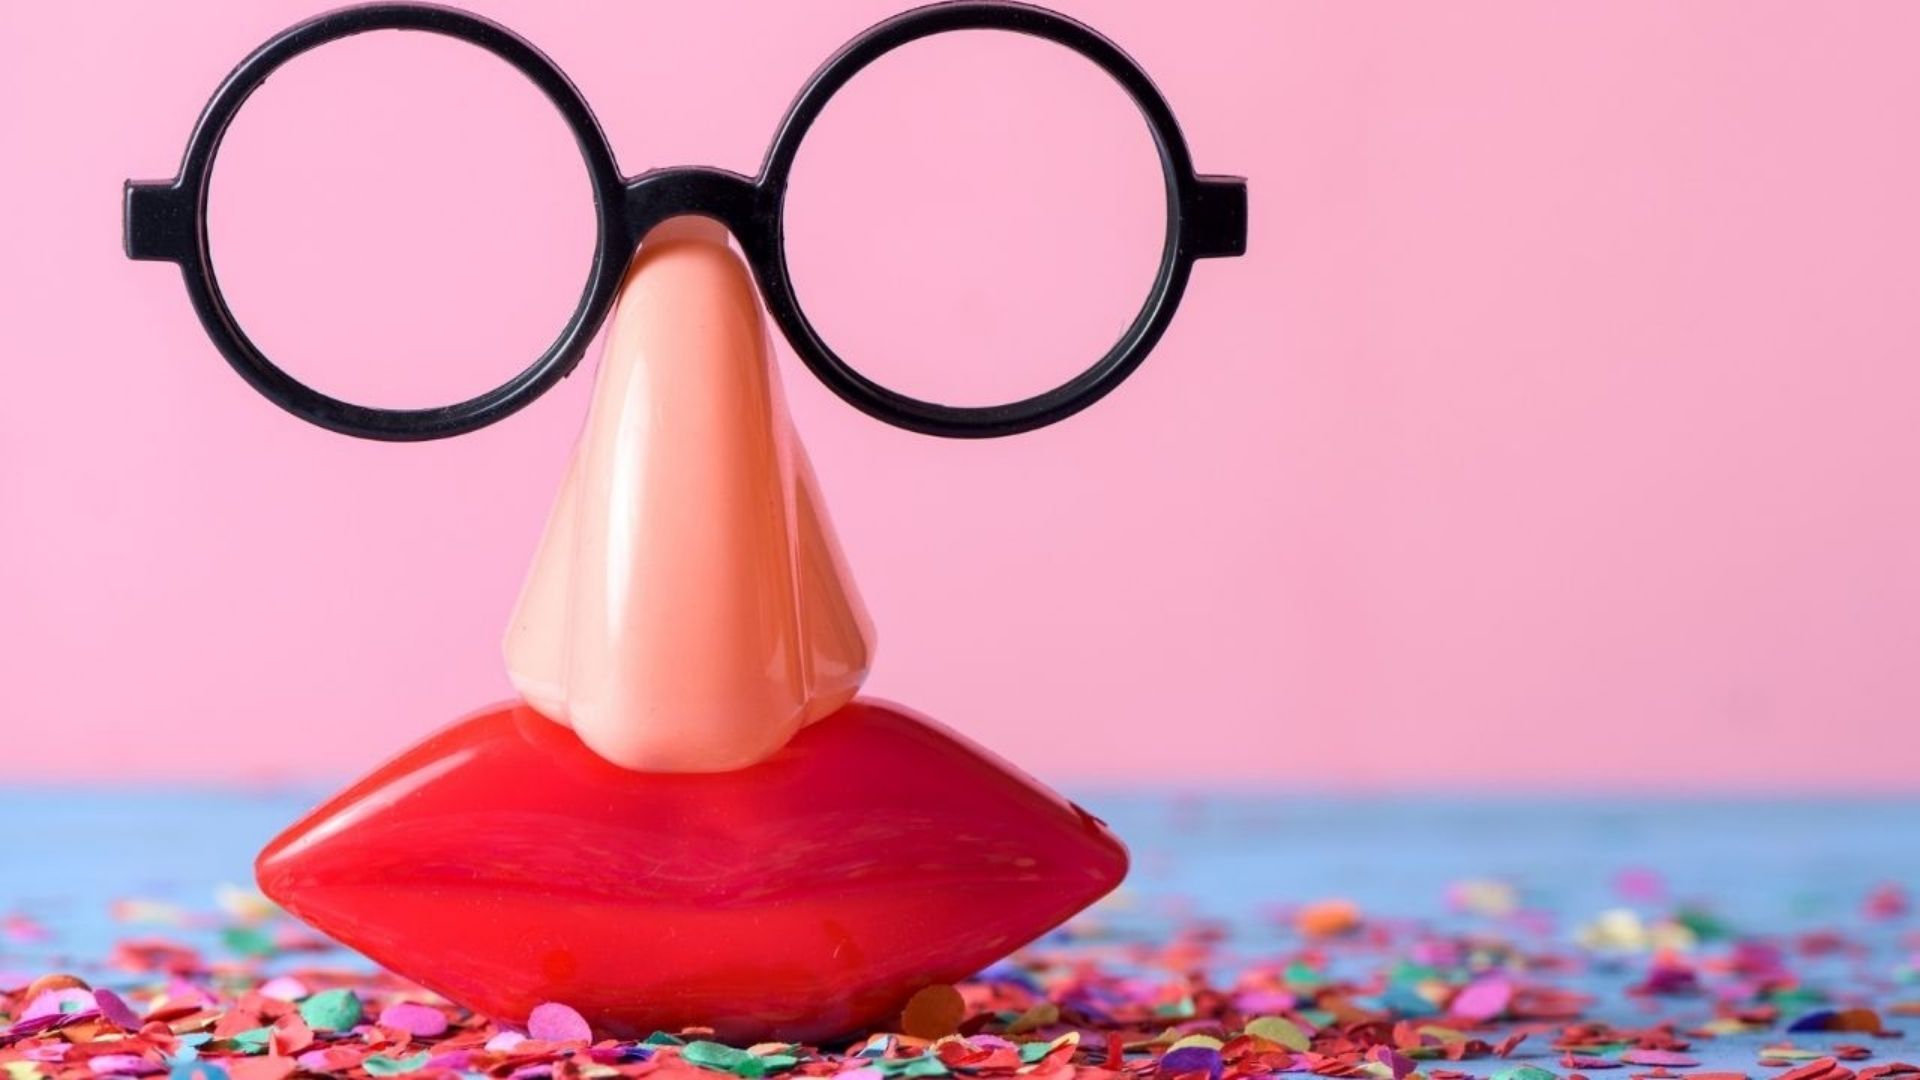 Glasses with nose and lips